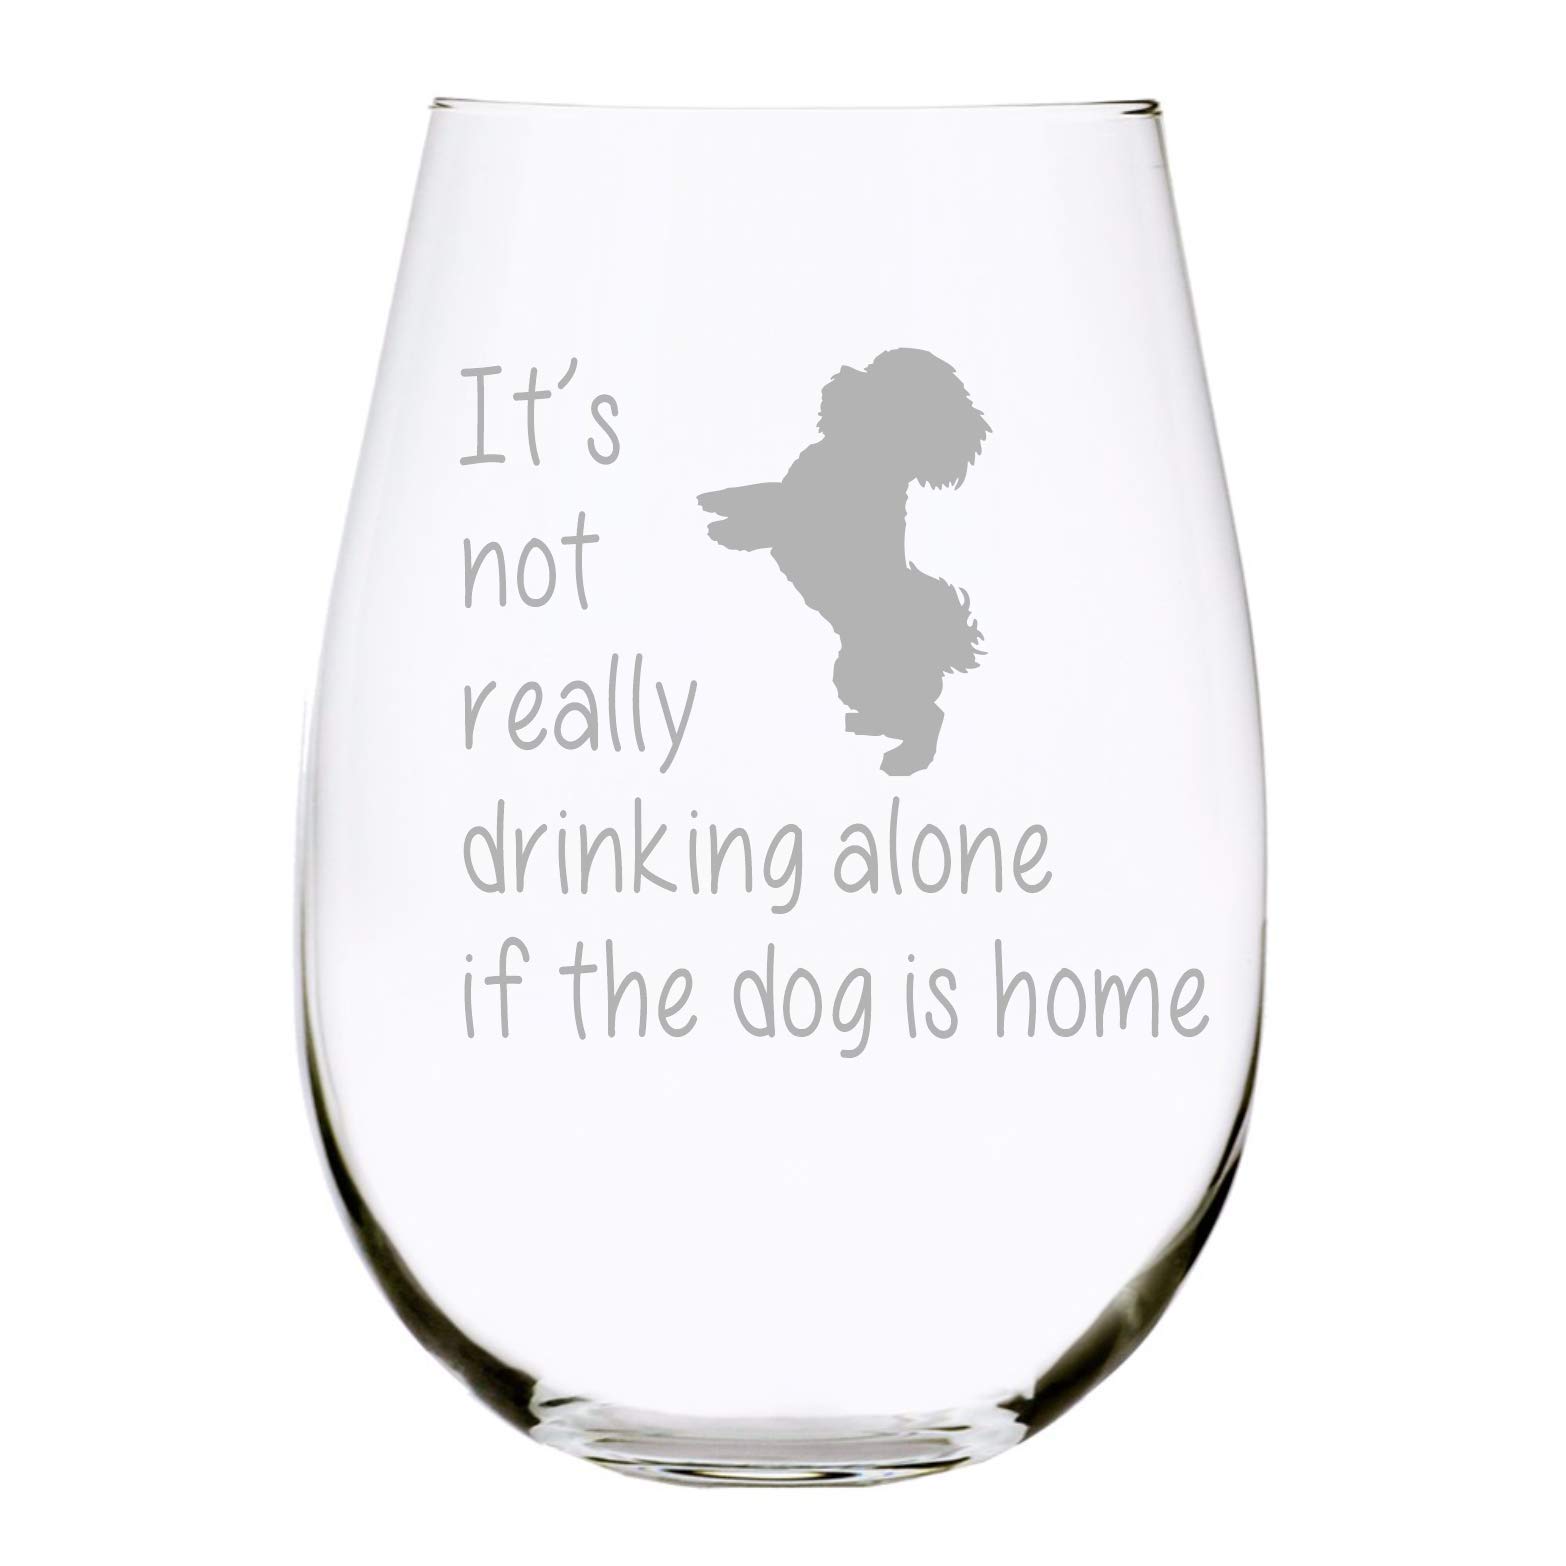 C&M Personal Gifts The Dog is Home stemless Wine Glass, 17 oz.-Lead Free Crystal stemless drinking glass, Perfect Dog Lover Gift for him or her (dog) - Laser Engraved (D2)